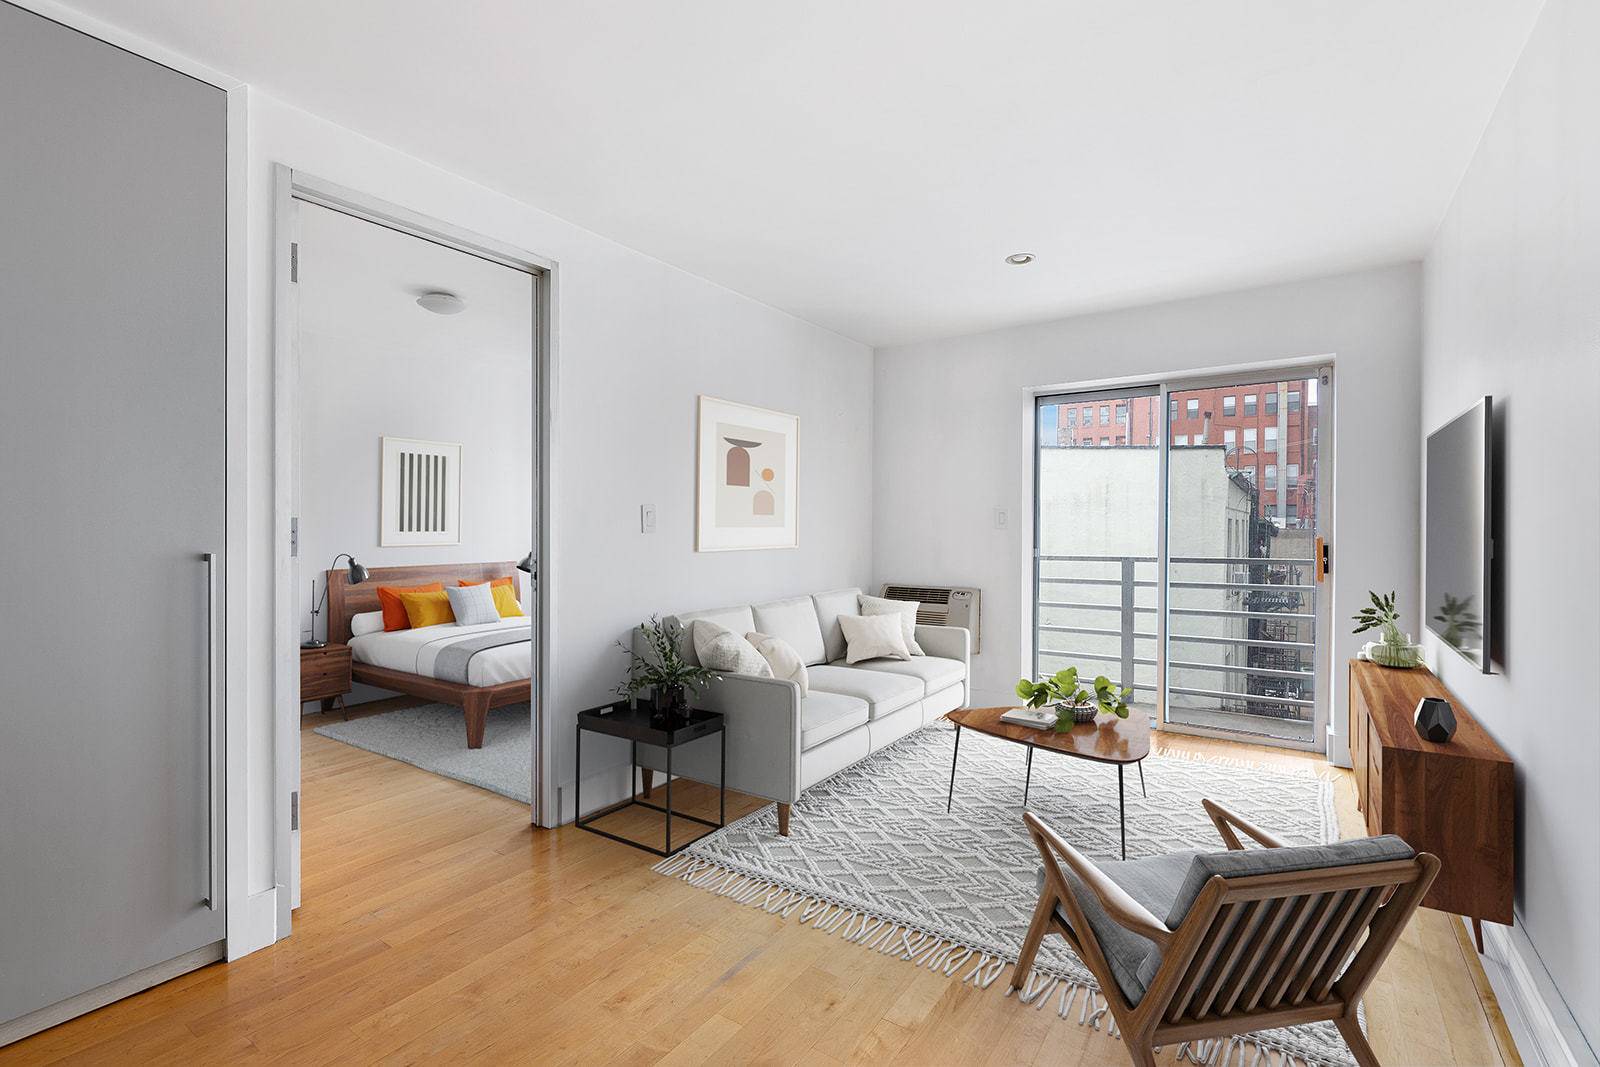 Super chic amp ; rarely available modern home in Little Italy SoHo Chinatown.